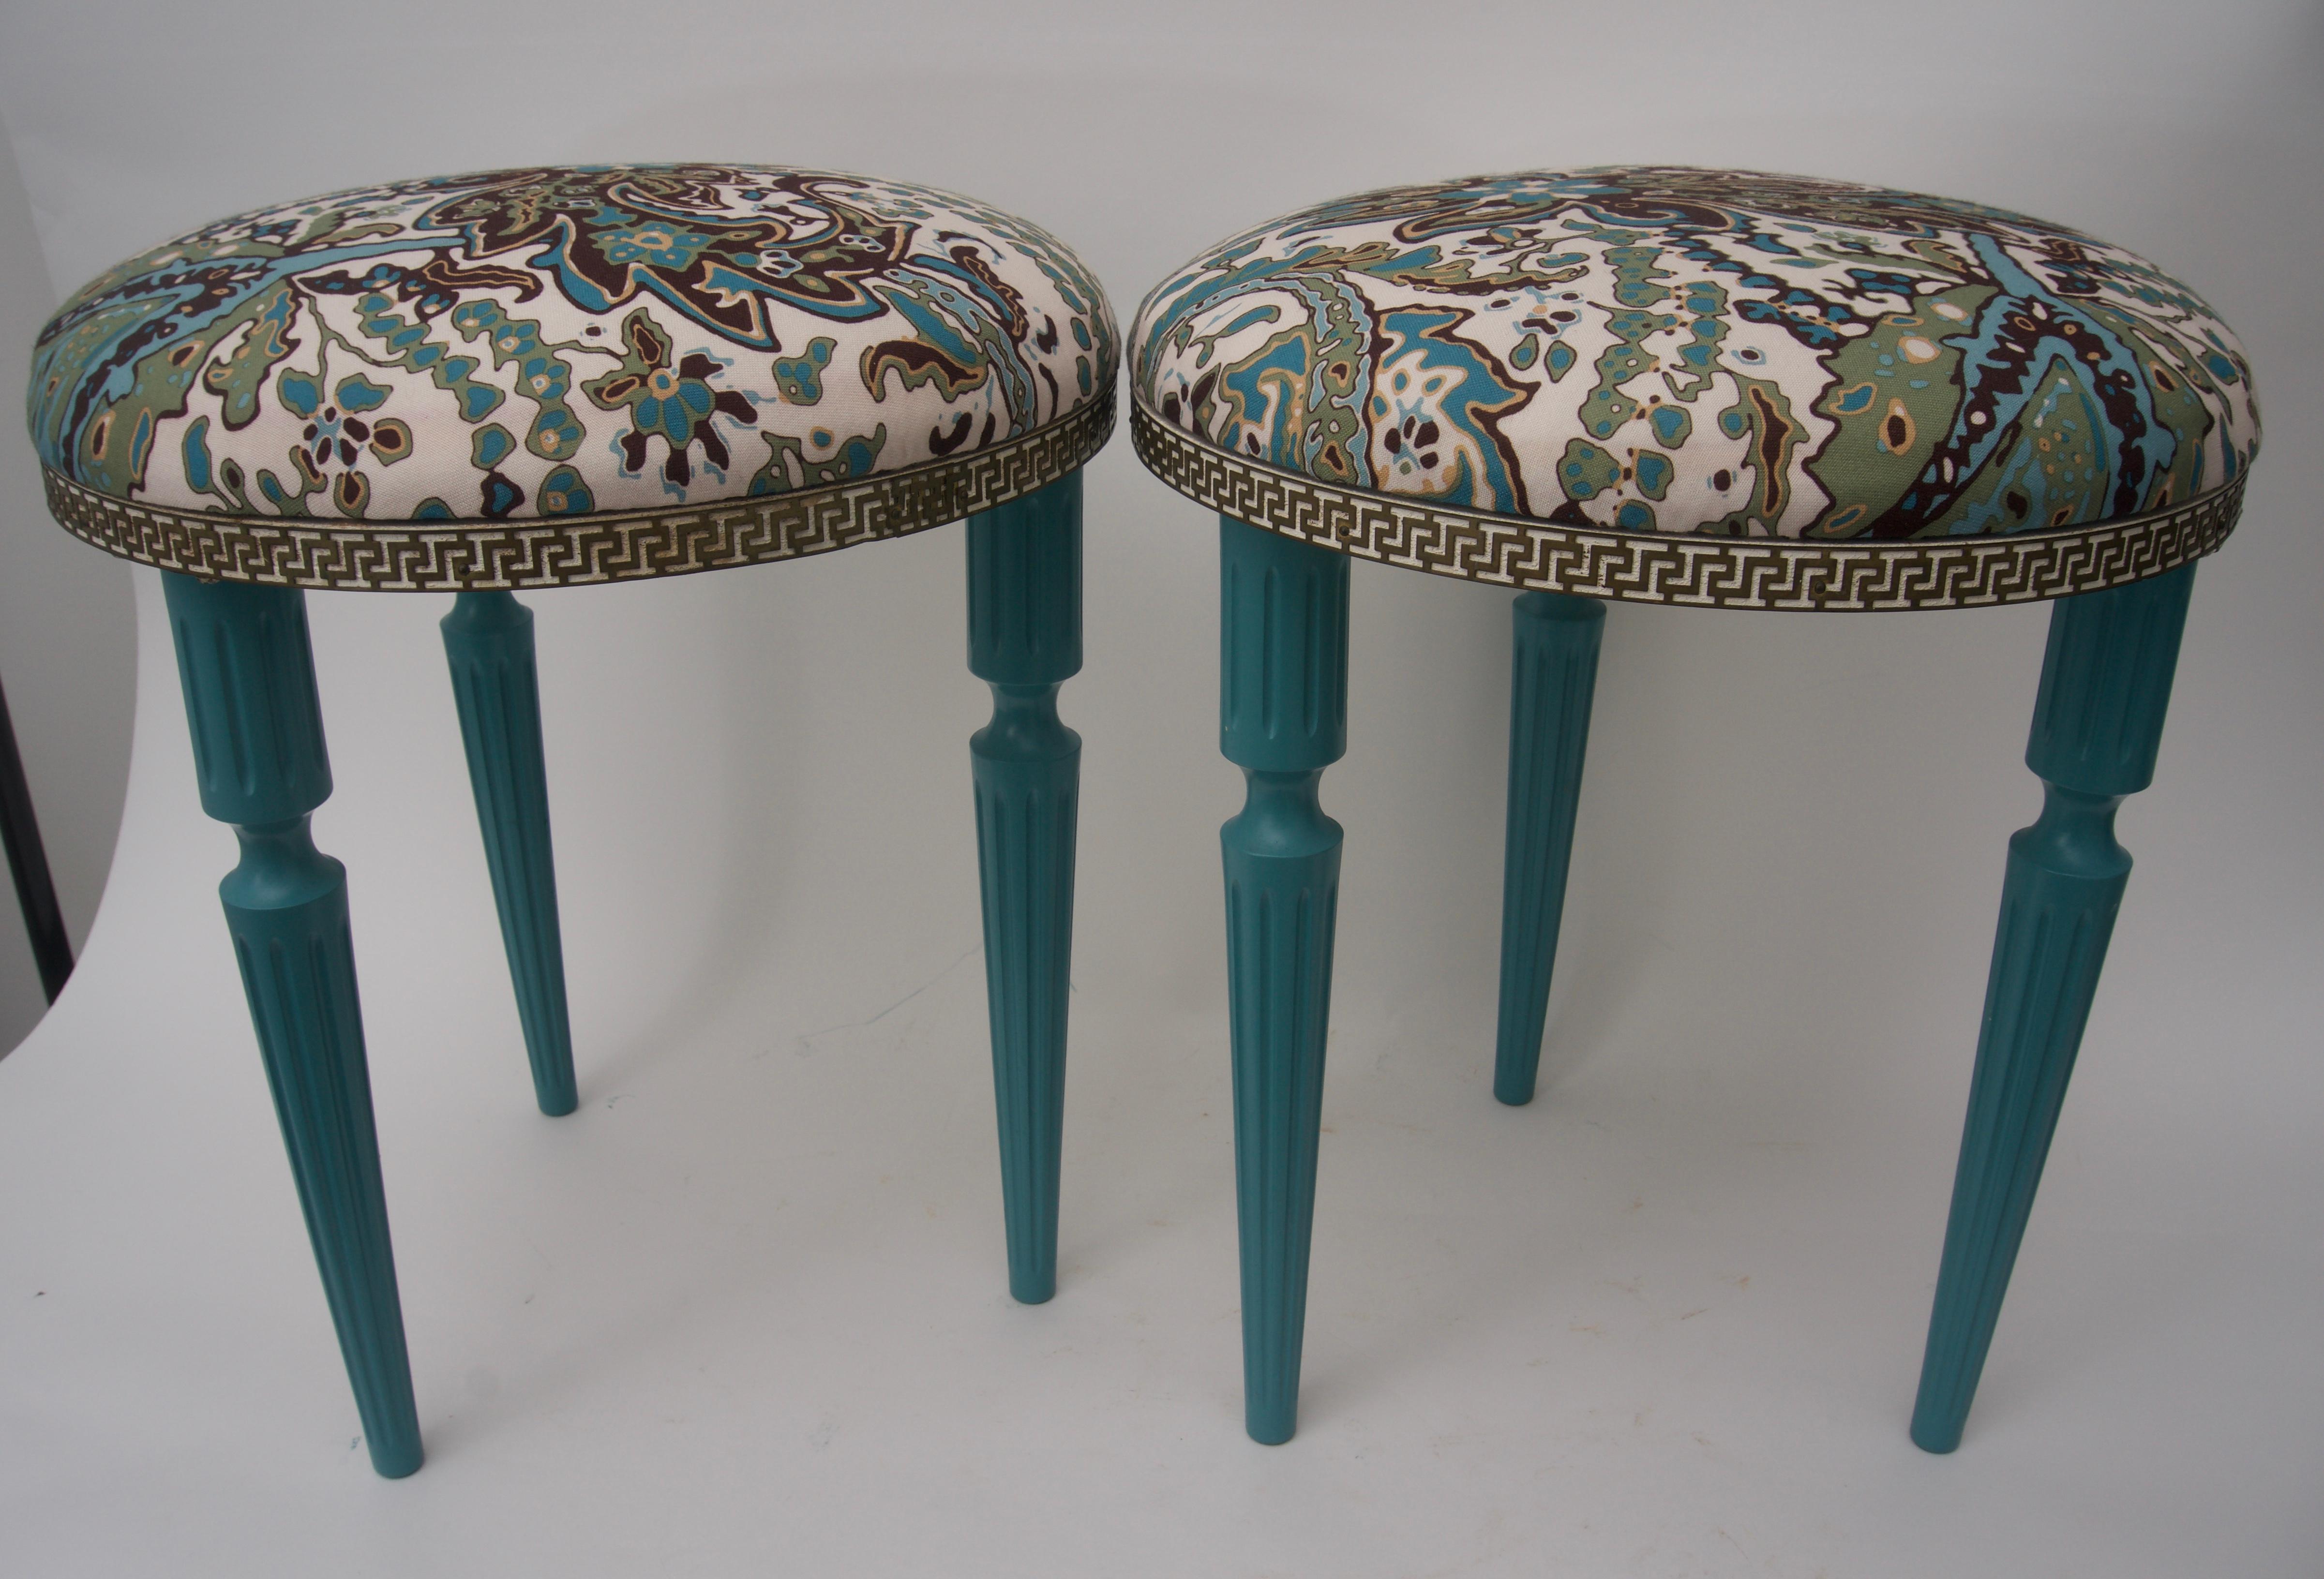 This stylish pair of stools are in the Hollywood Regency vain with there Louis XVI style frames that have been lacquered in a deep turquoise with a woven floral fabric seat which is bordered with a pierced metal band.